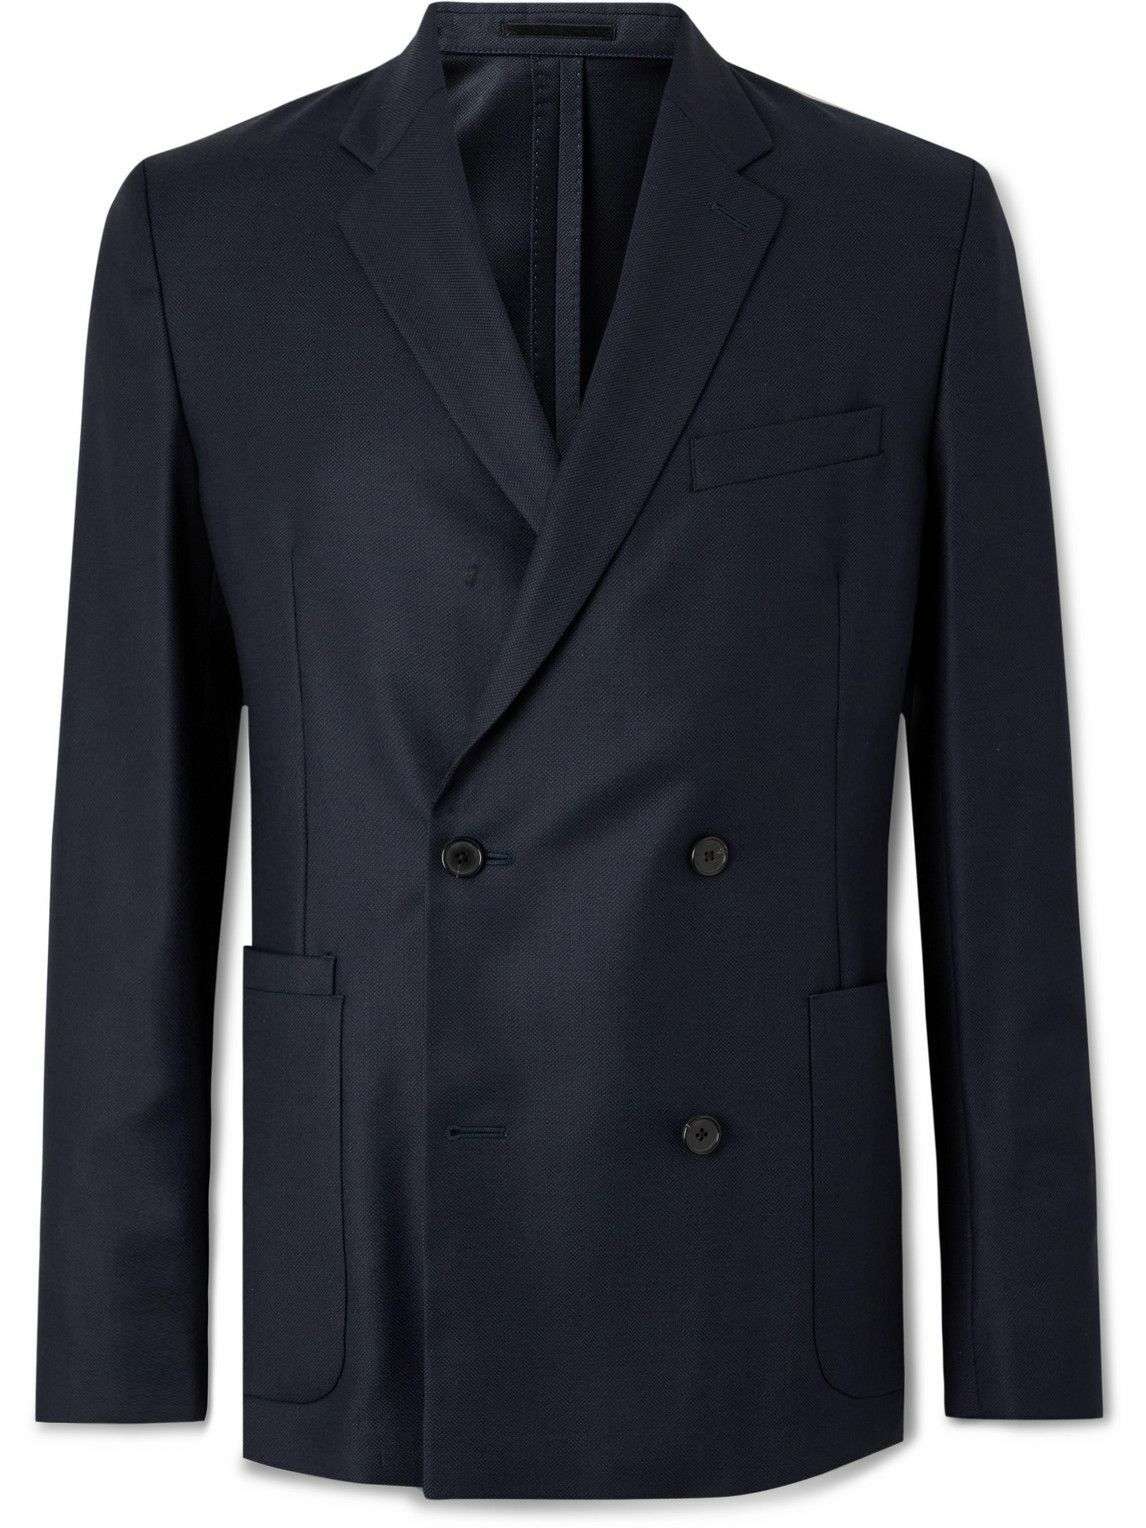 Paul Smith - Double-Breasted Wool Blazer - Blue Paul Smith